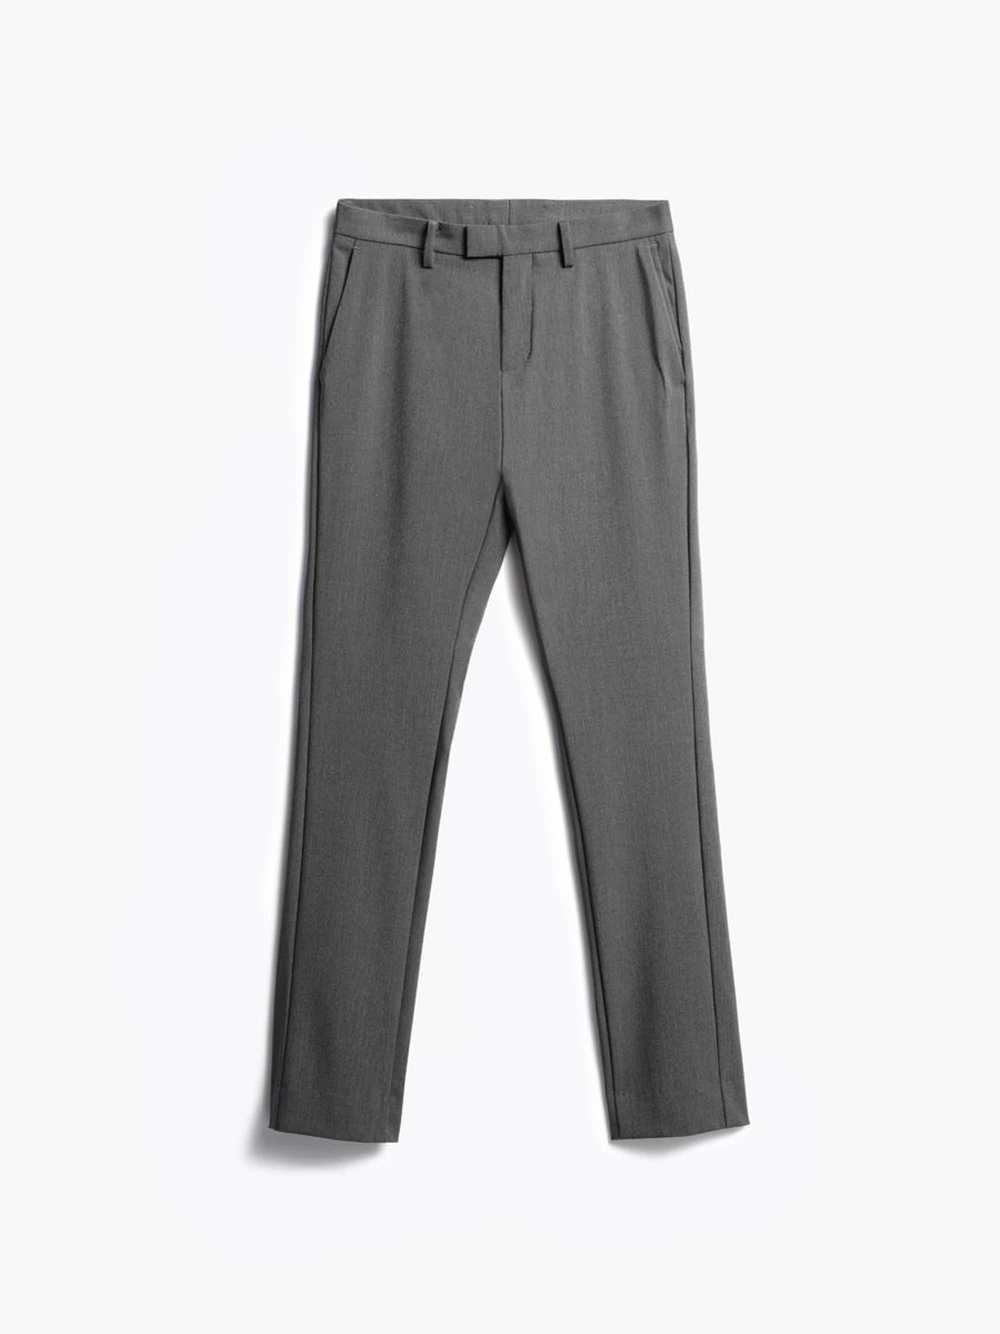 Ministry of Supply Men's Velocity Dress Pant - So… - image 1